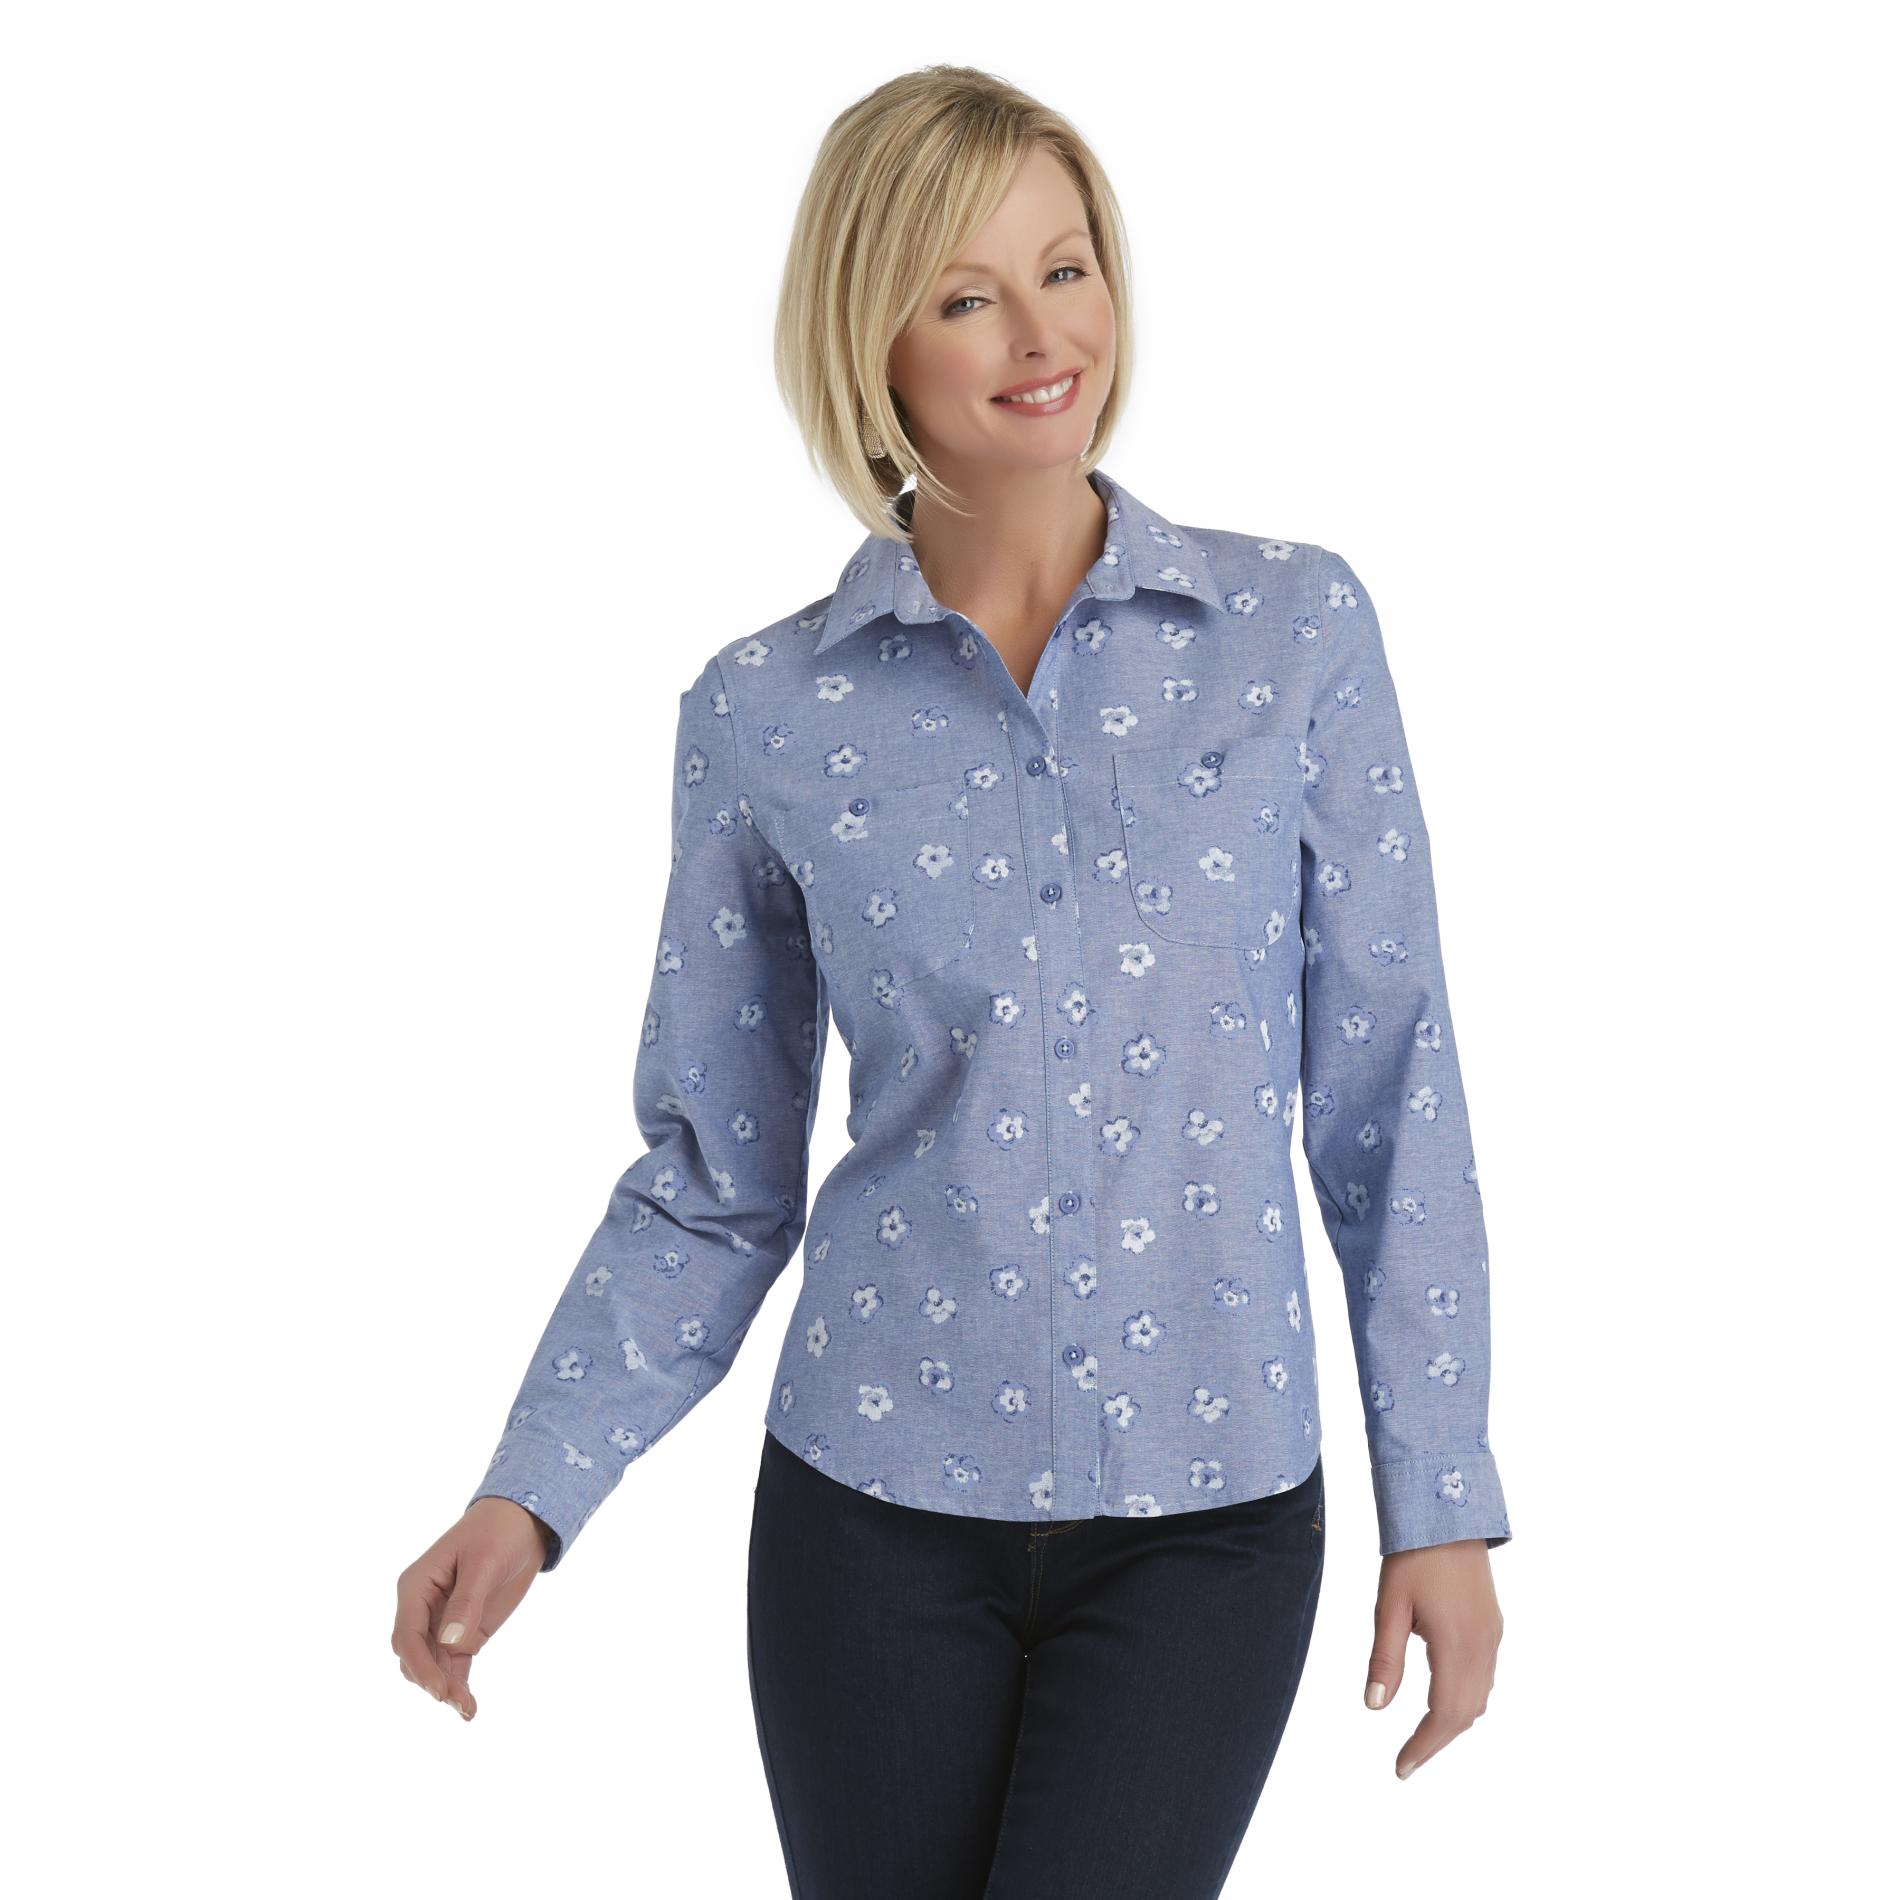 Basic Editions Women's Chambray Blouse - Floral